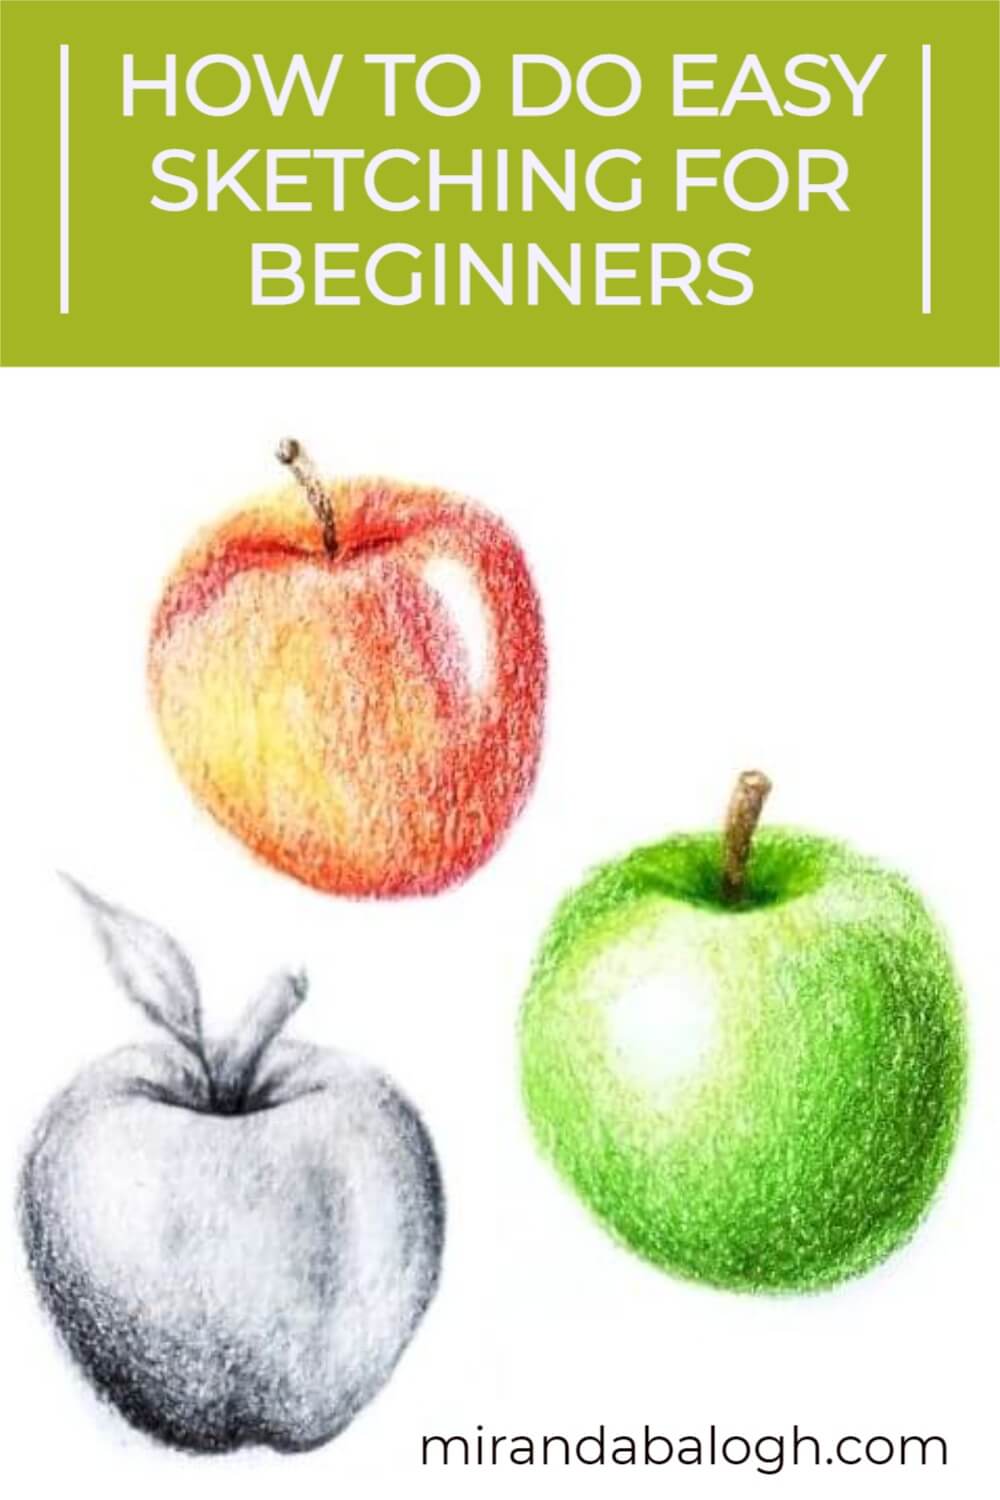 How To Do Easy Sketching For Beginners (4 Awesome Tutorials)